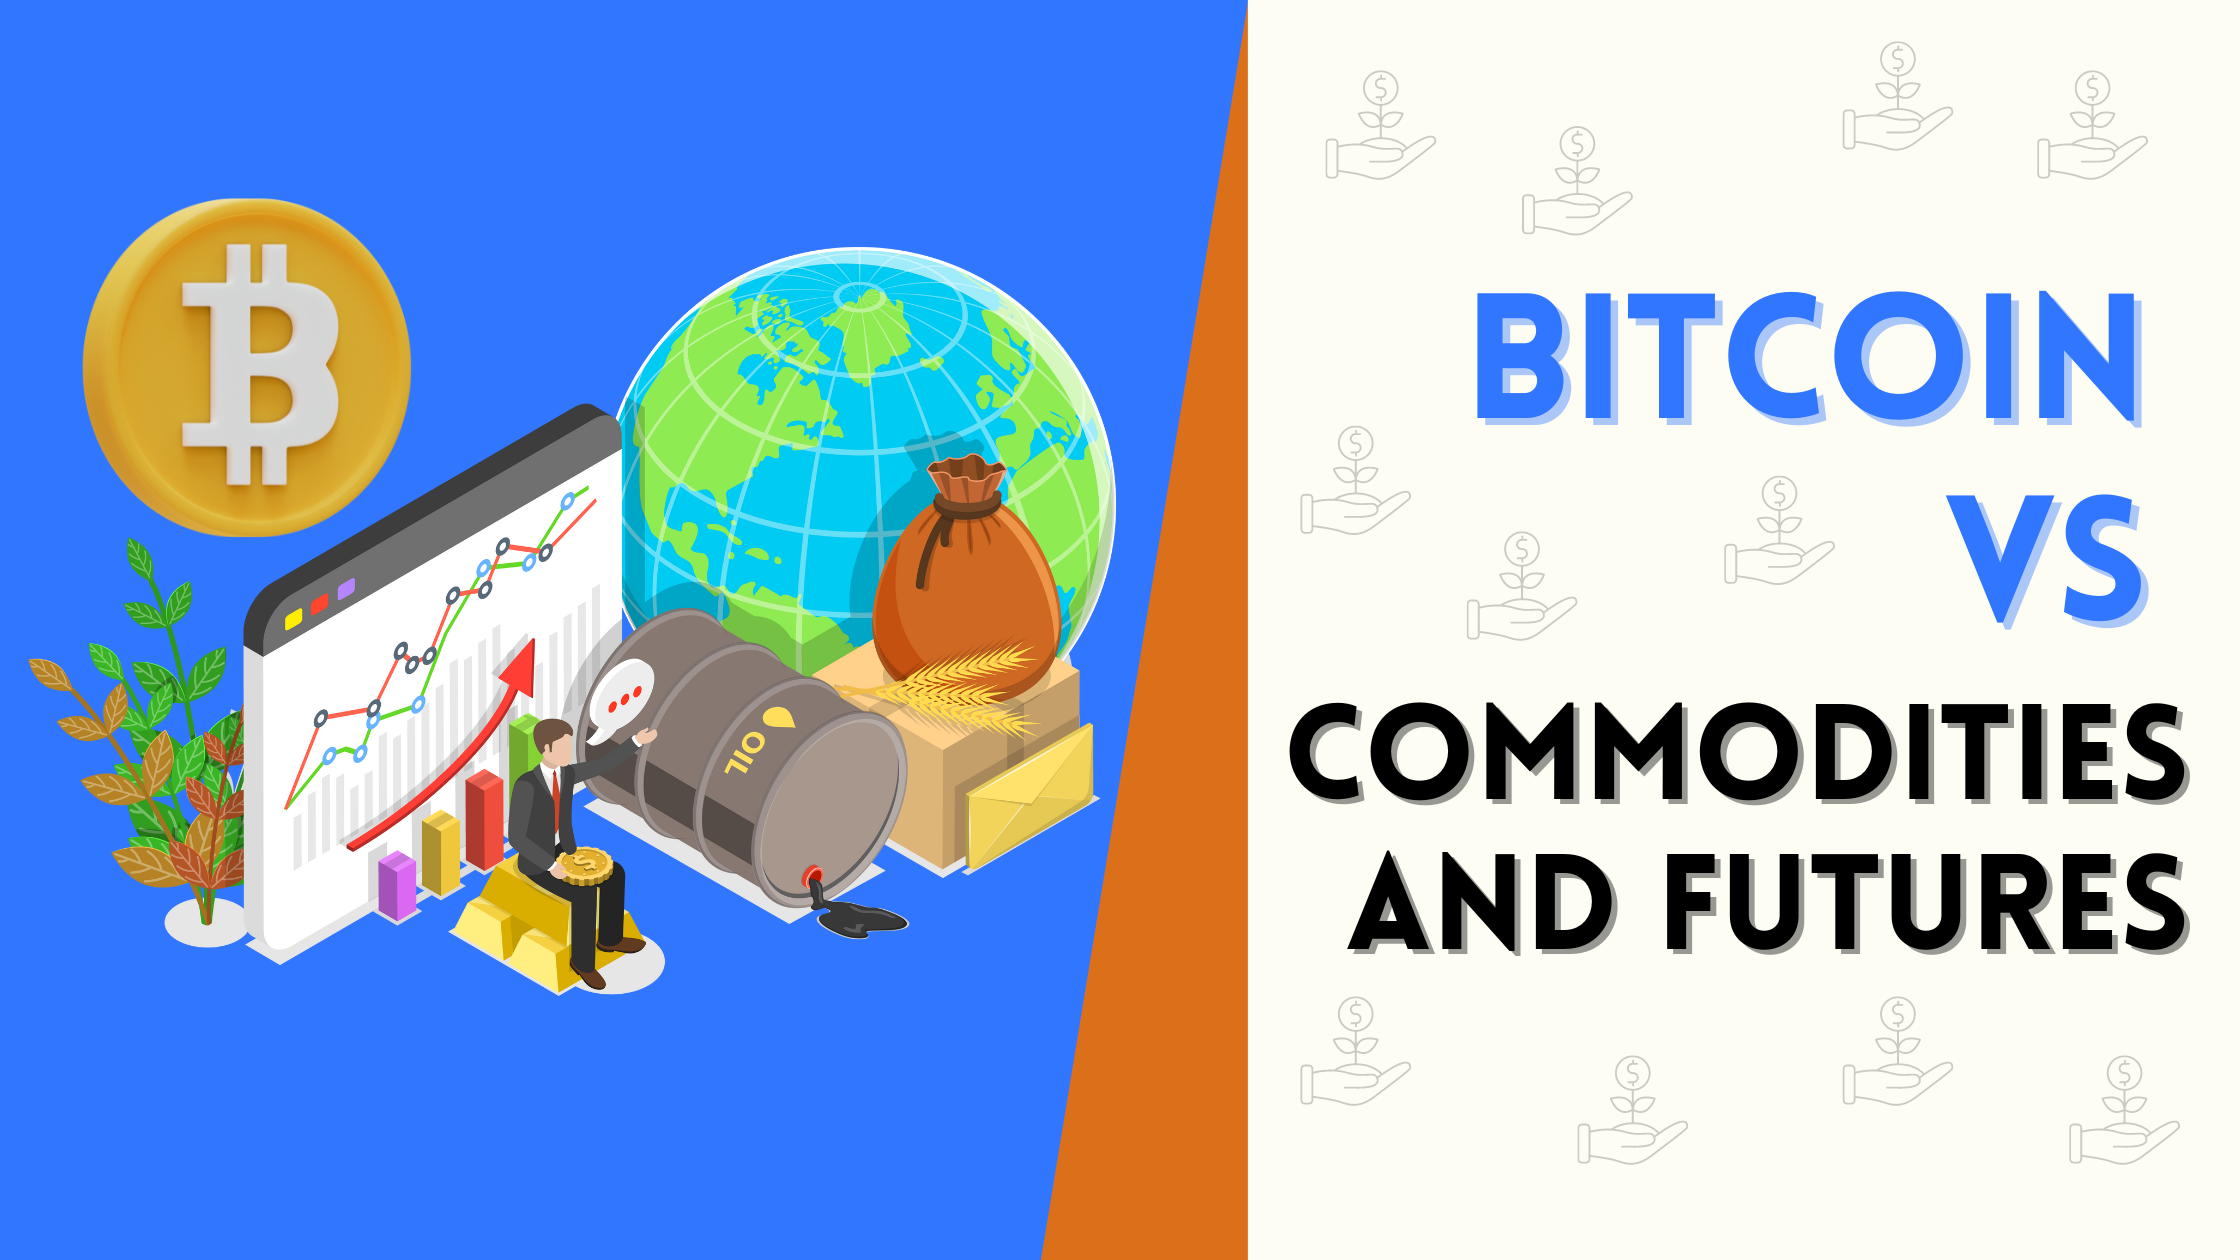 Investing in Bitcoin vs Commodities and Futures